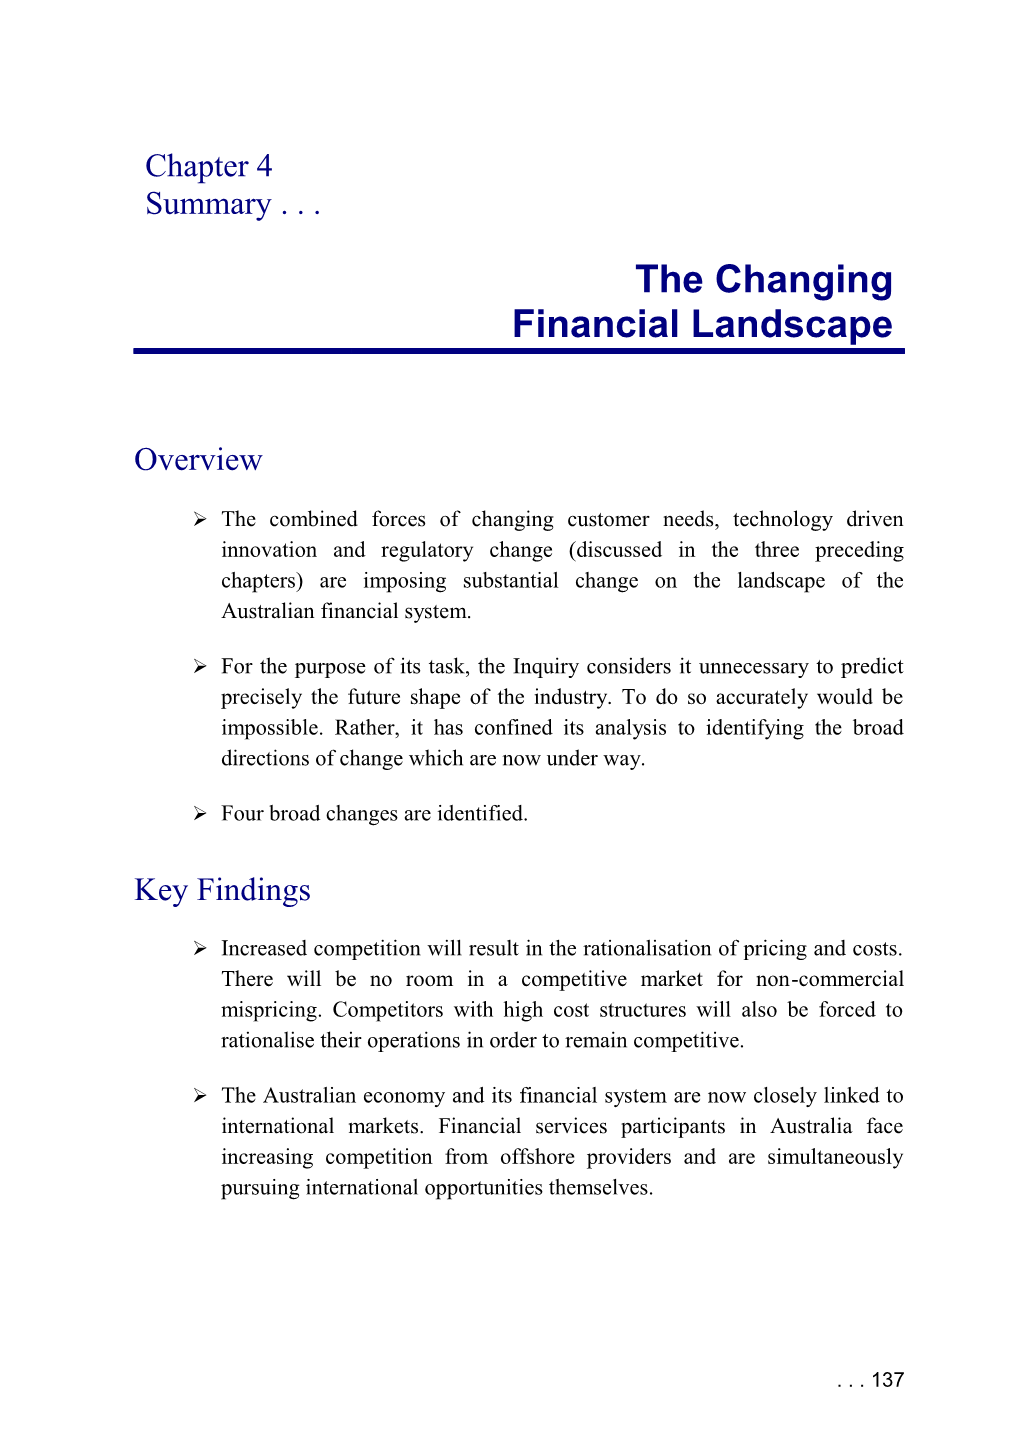 Finacial System Inquiry (Wallis Report) - the Changing Financial Landscape